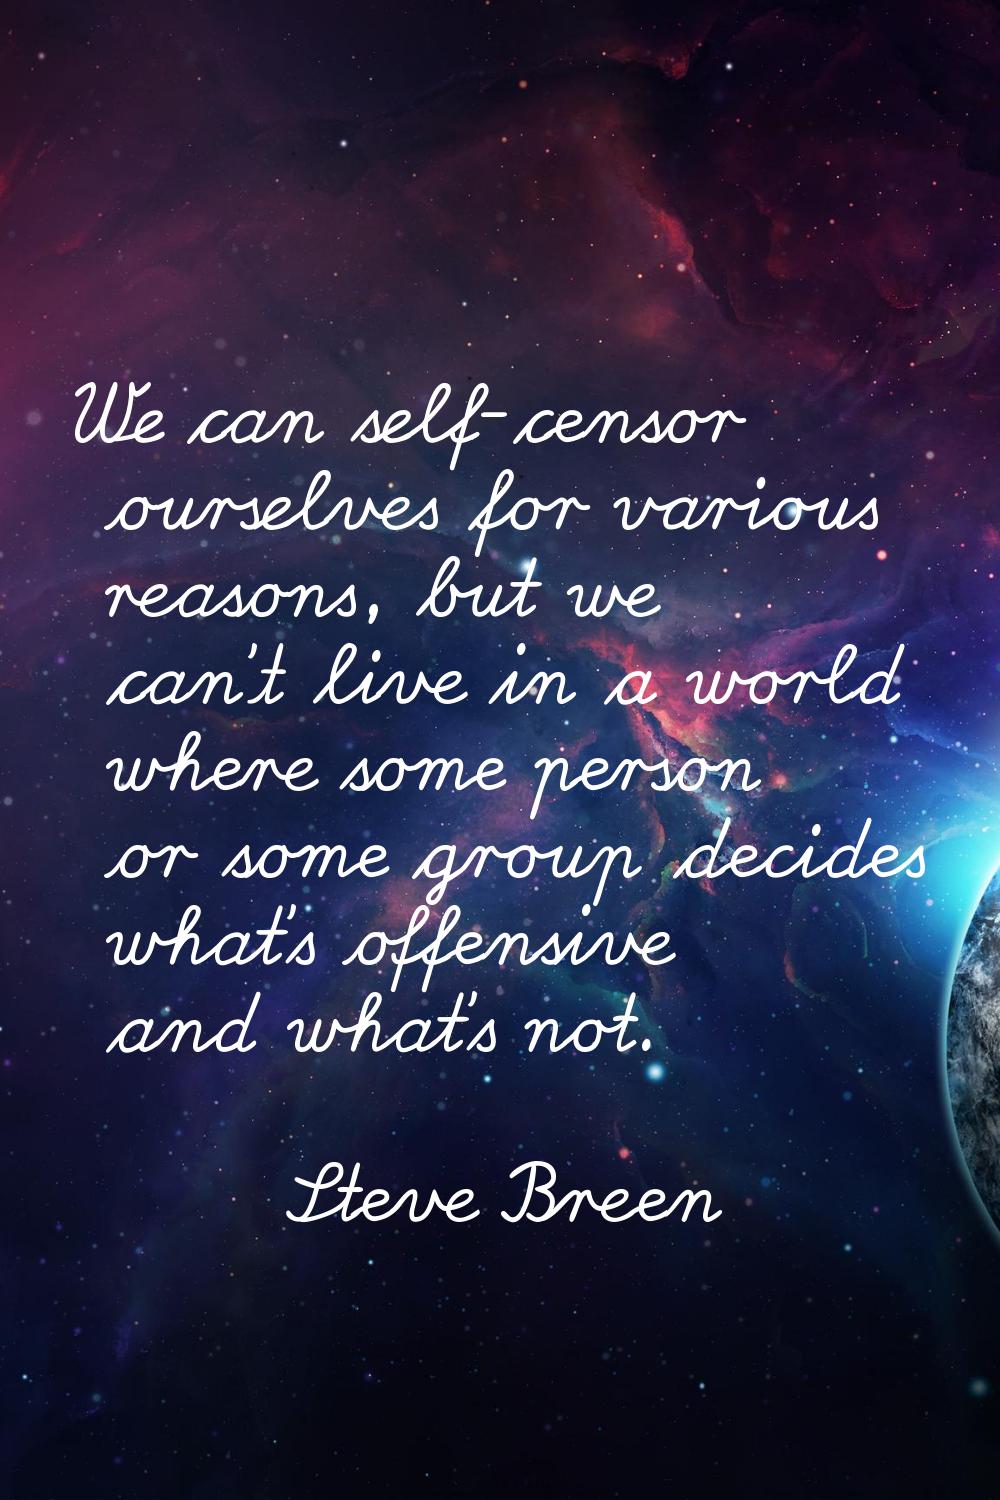 We can self-censor ourselves for various reasons, but we can't live in a world where some person or